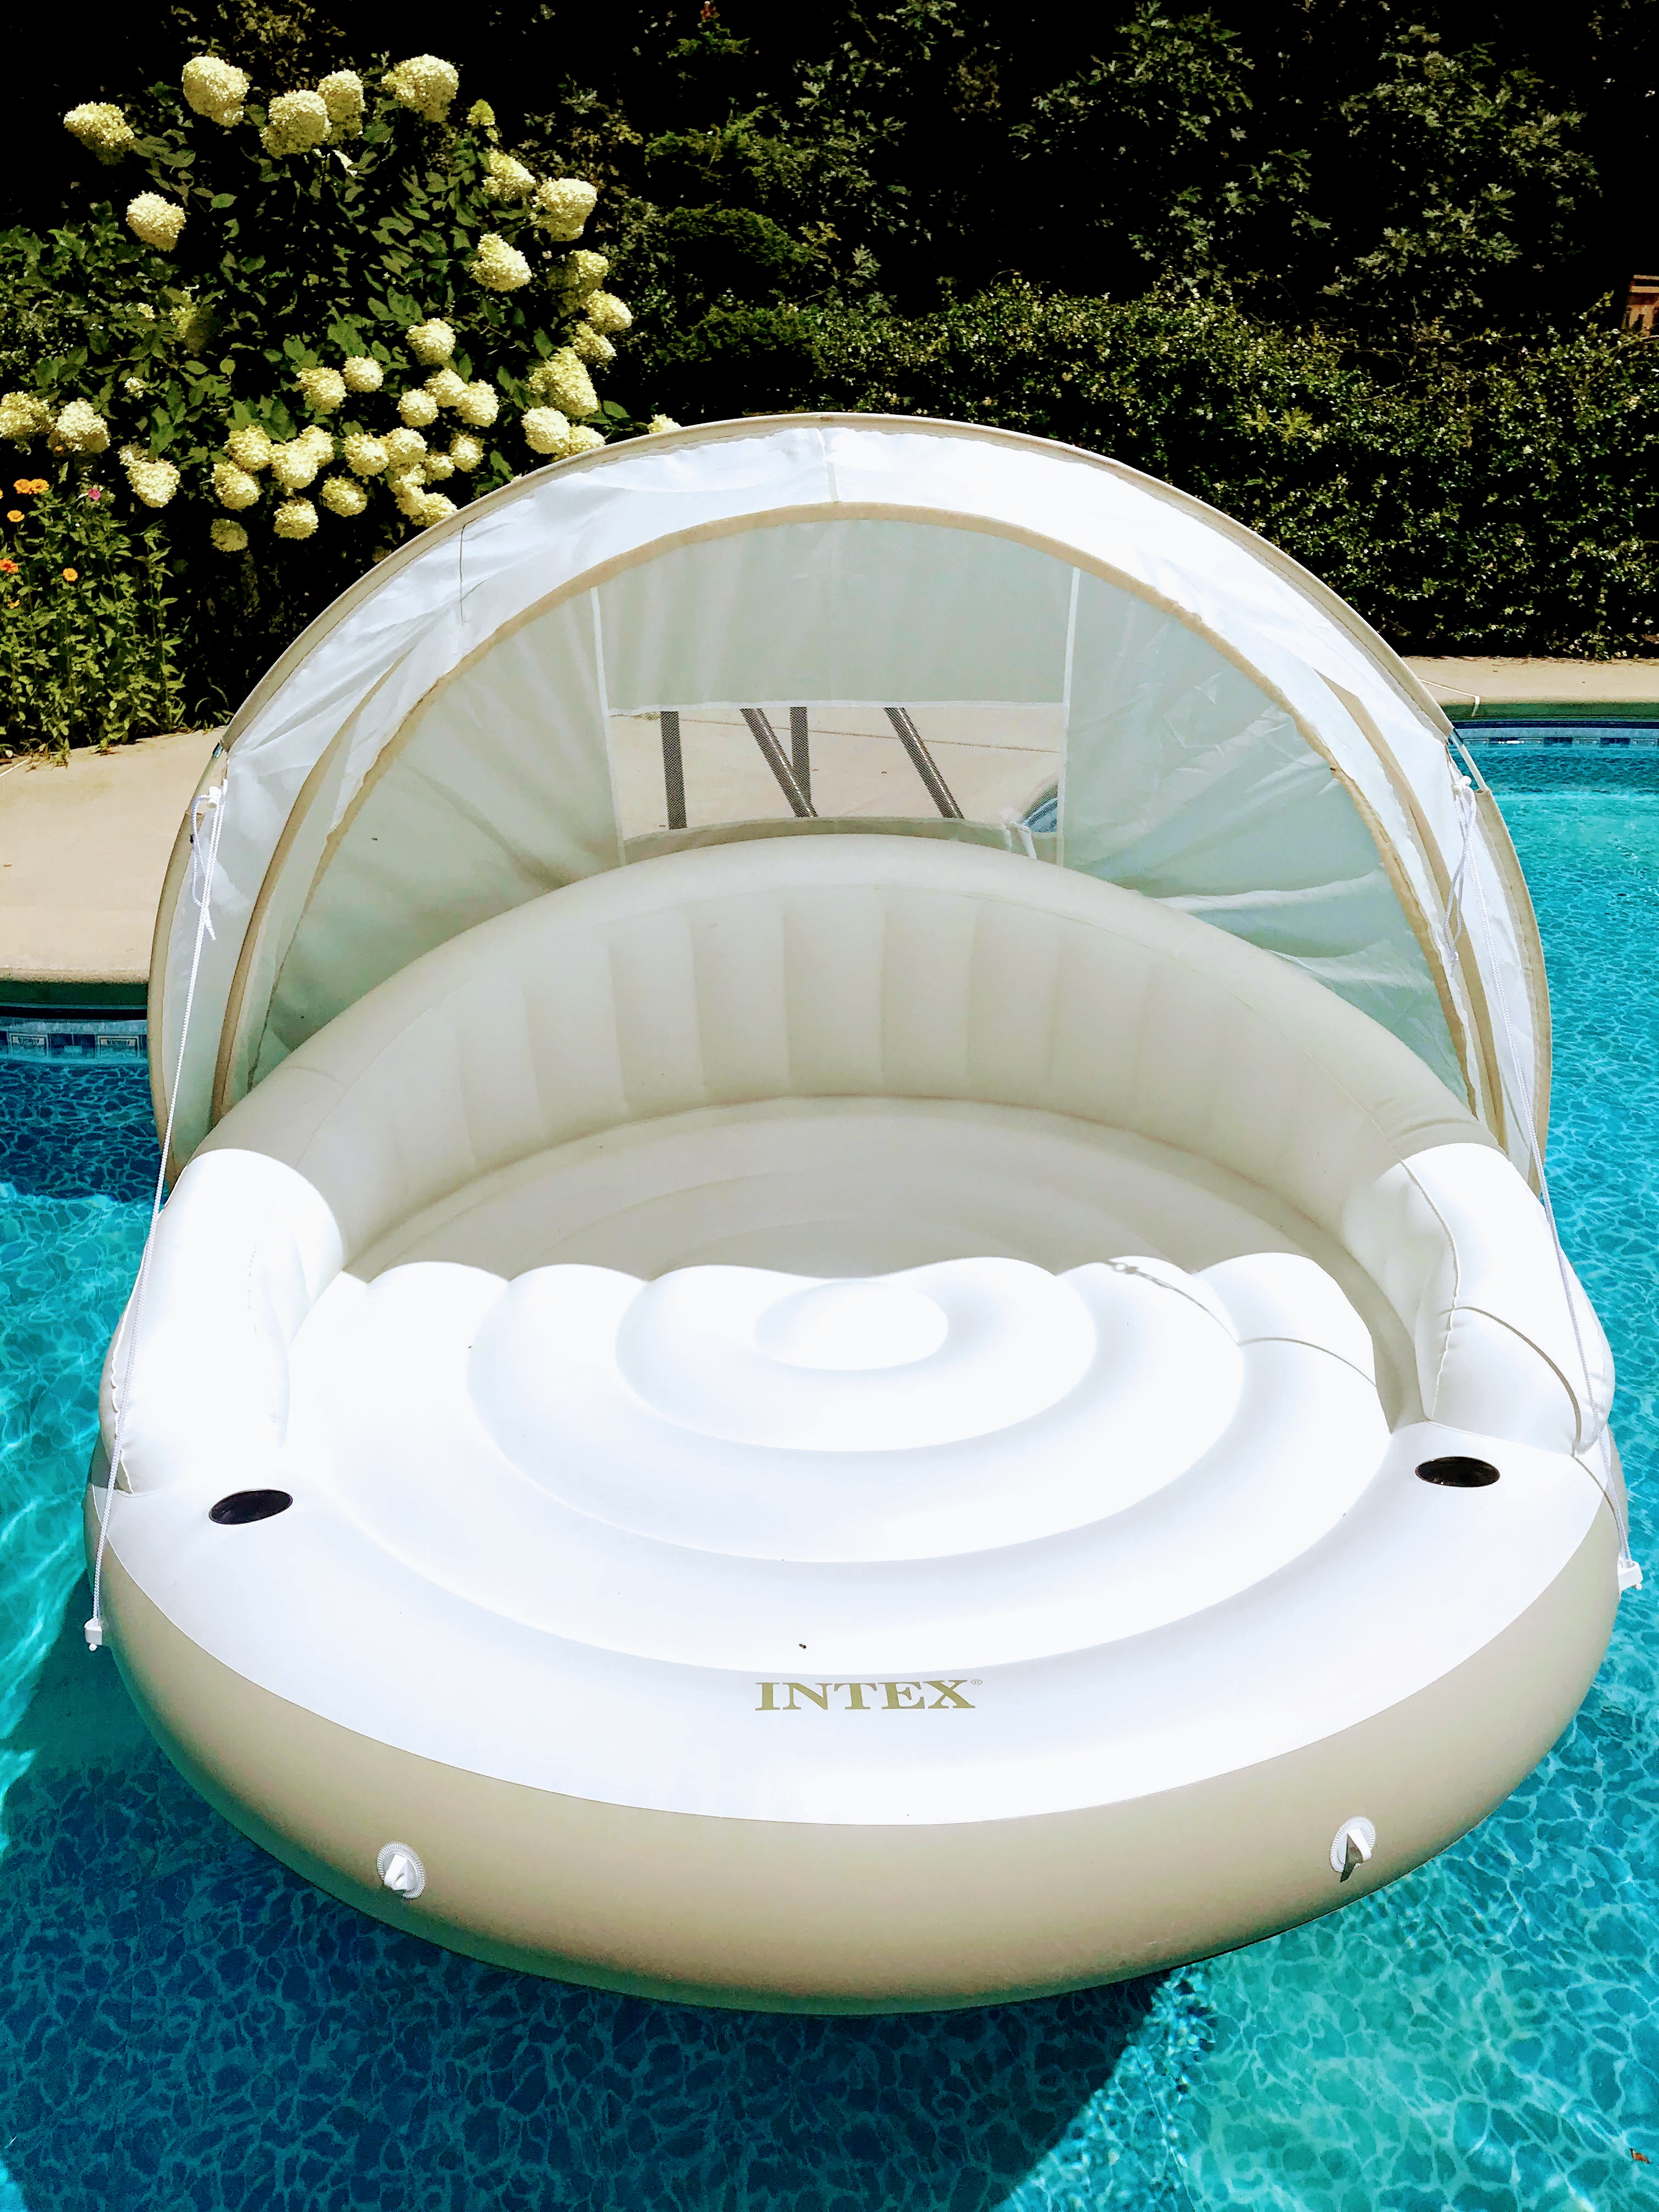 2 person pool float with a canopy